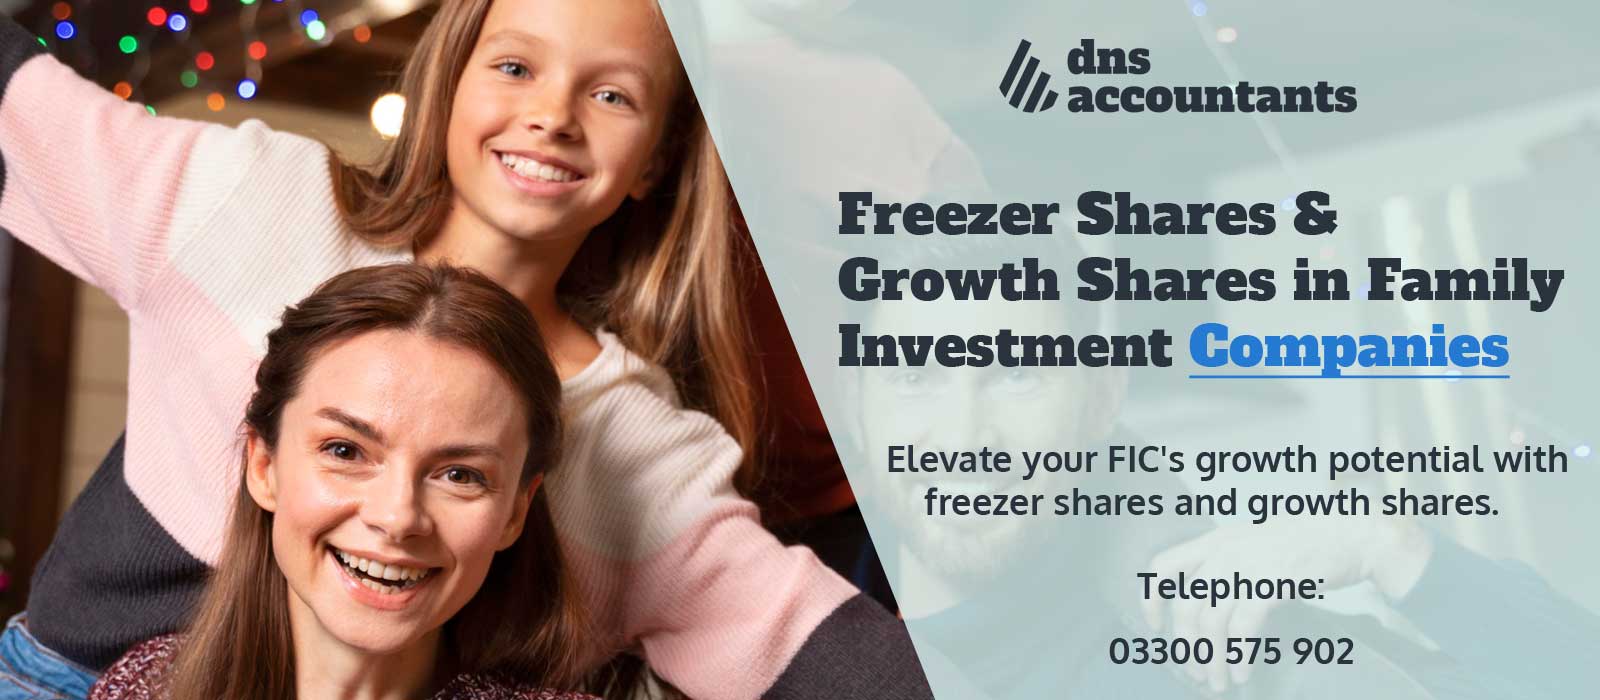 Freezer Shares & Growth Shares in Family Investment Companies